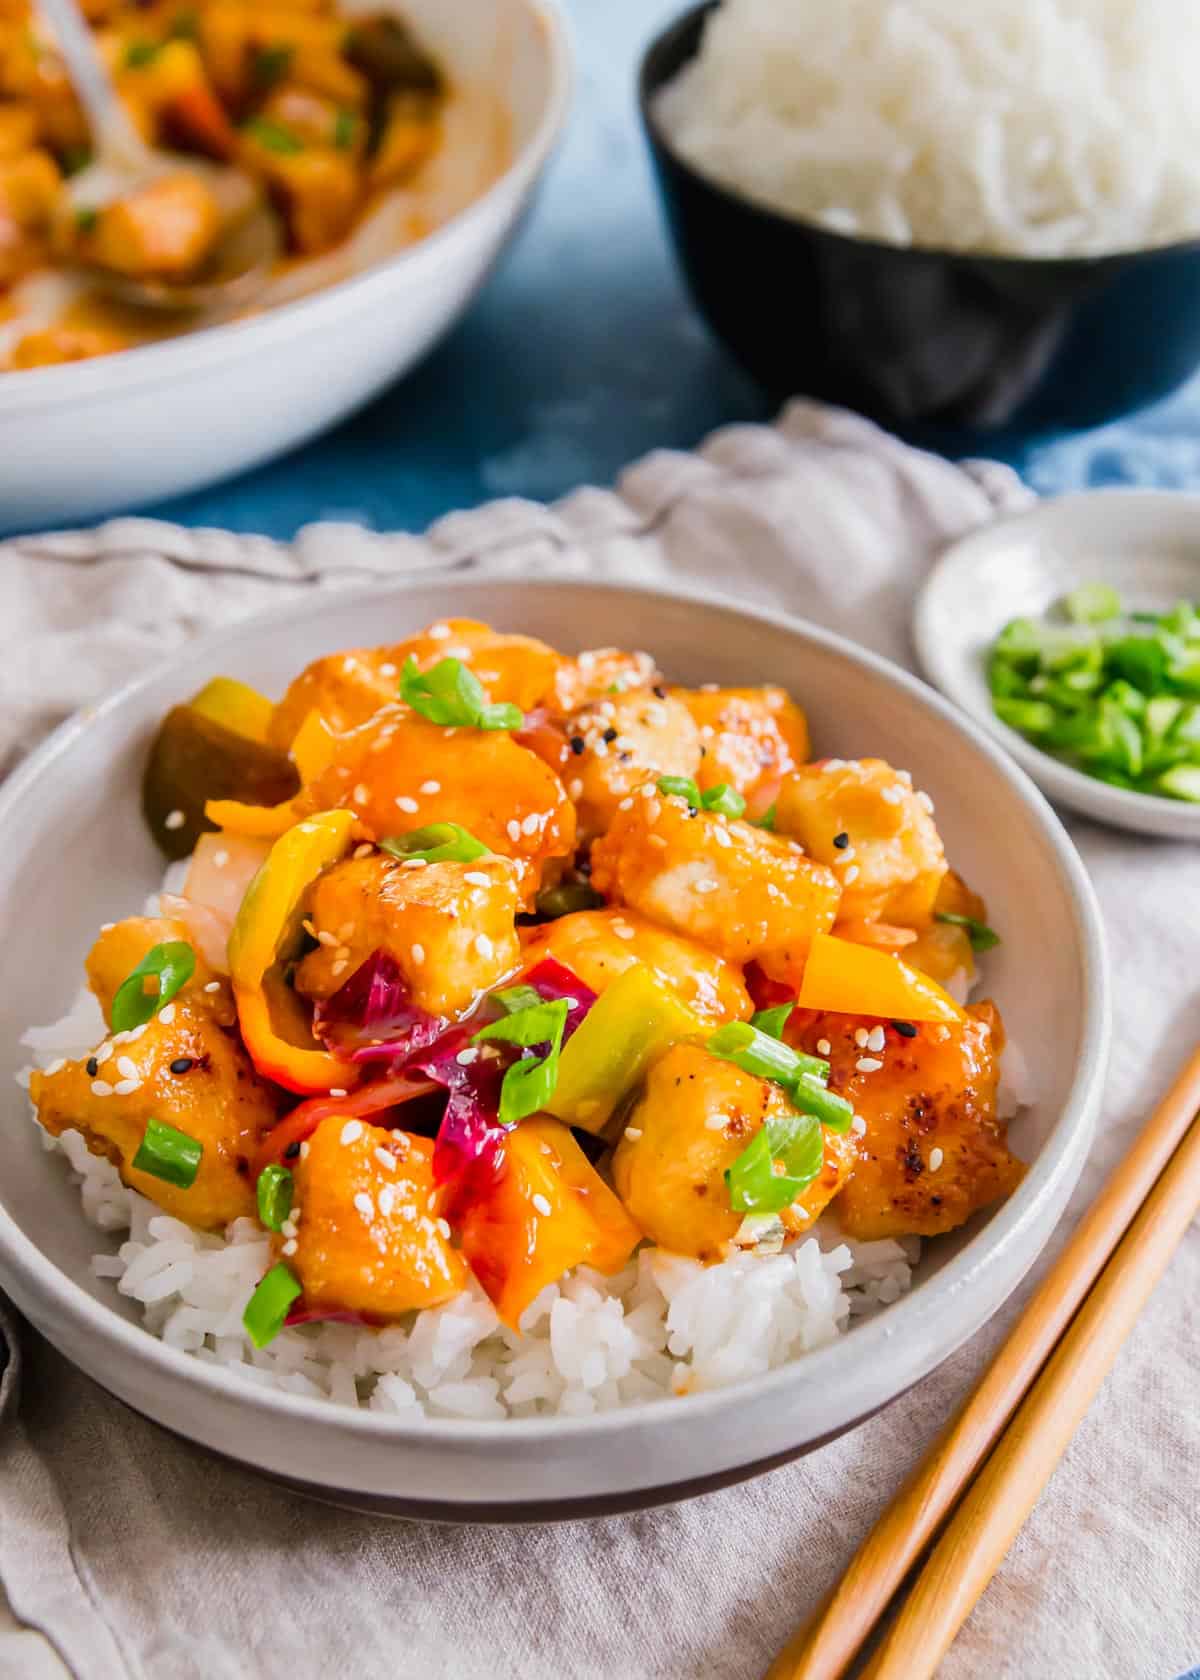 Make this sweet and sour tofu in under 30 minutes! Crispy tofu and a sticky sweet & sour sauce mimic the classic Chinese takeout dish in this vegetarian friendly meal.